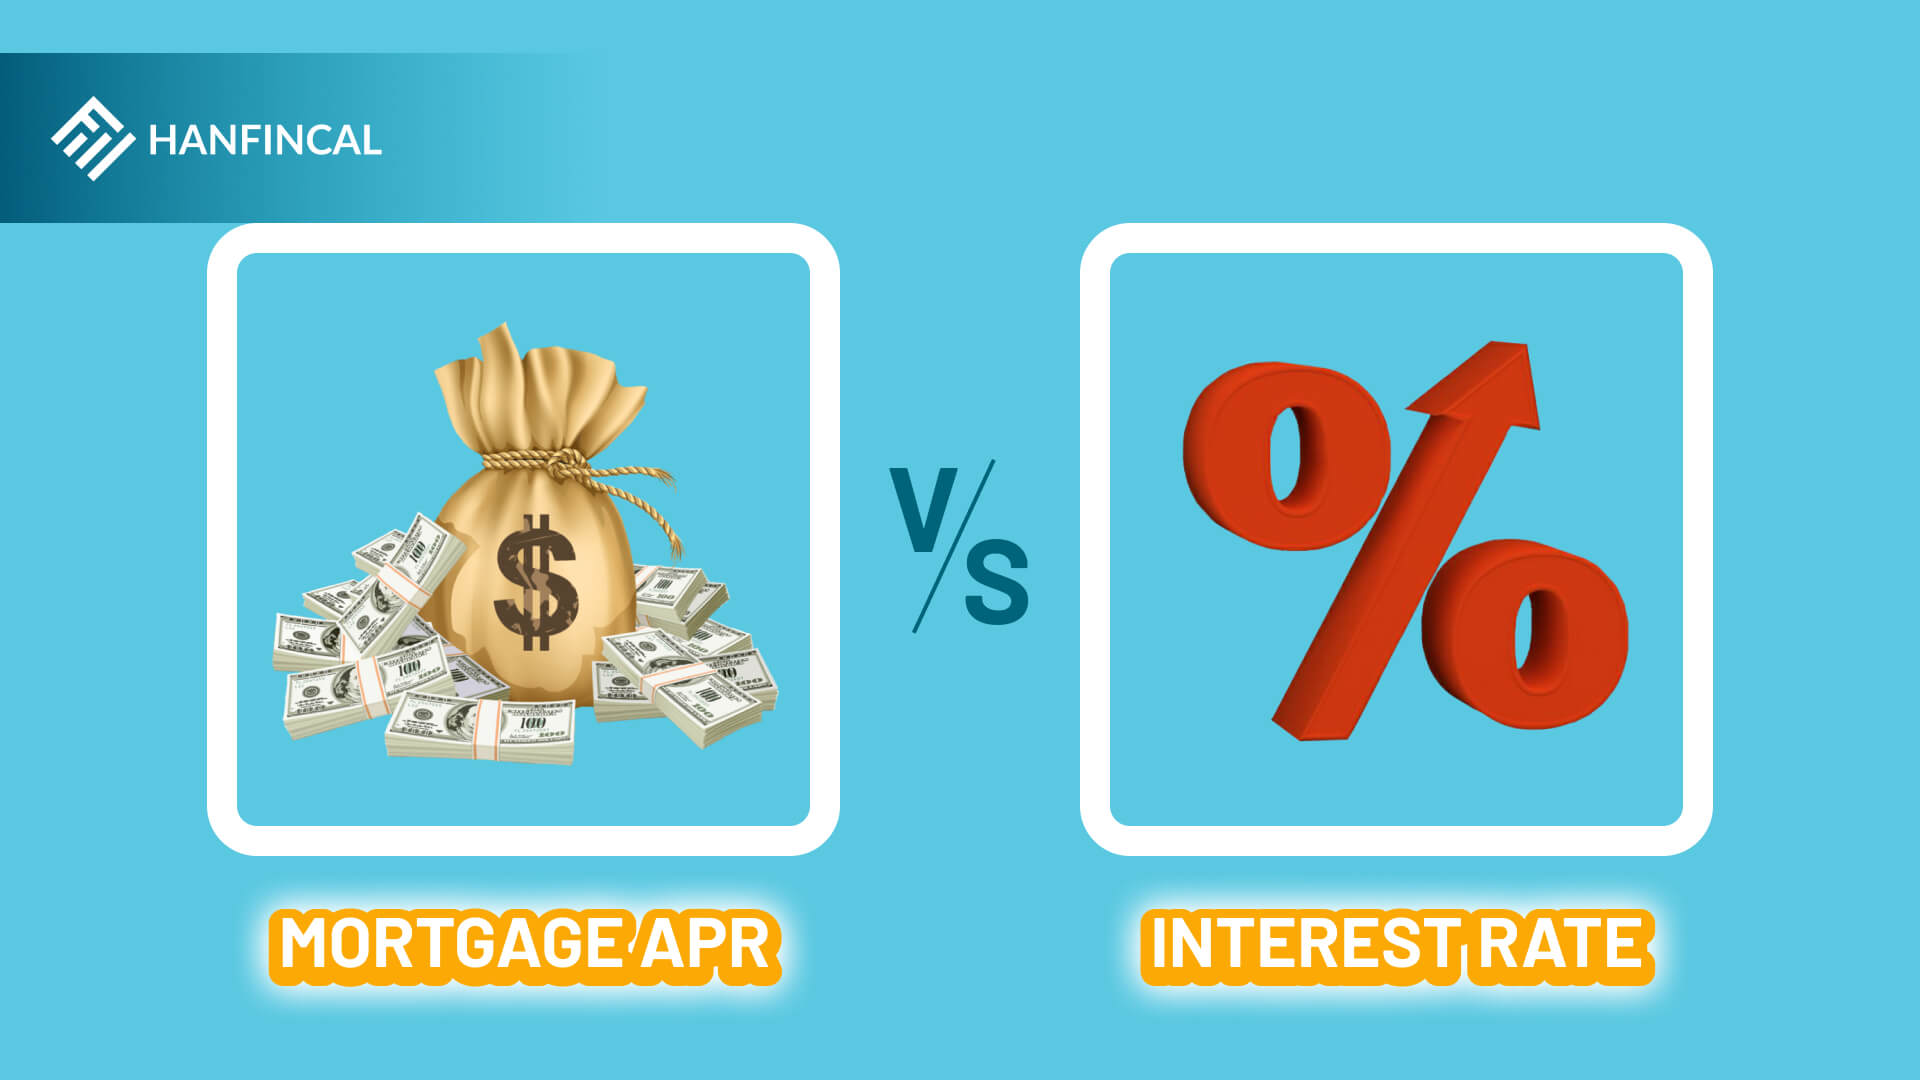 What’s the difference between interest and APR?